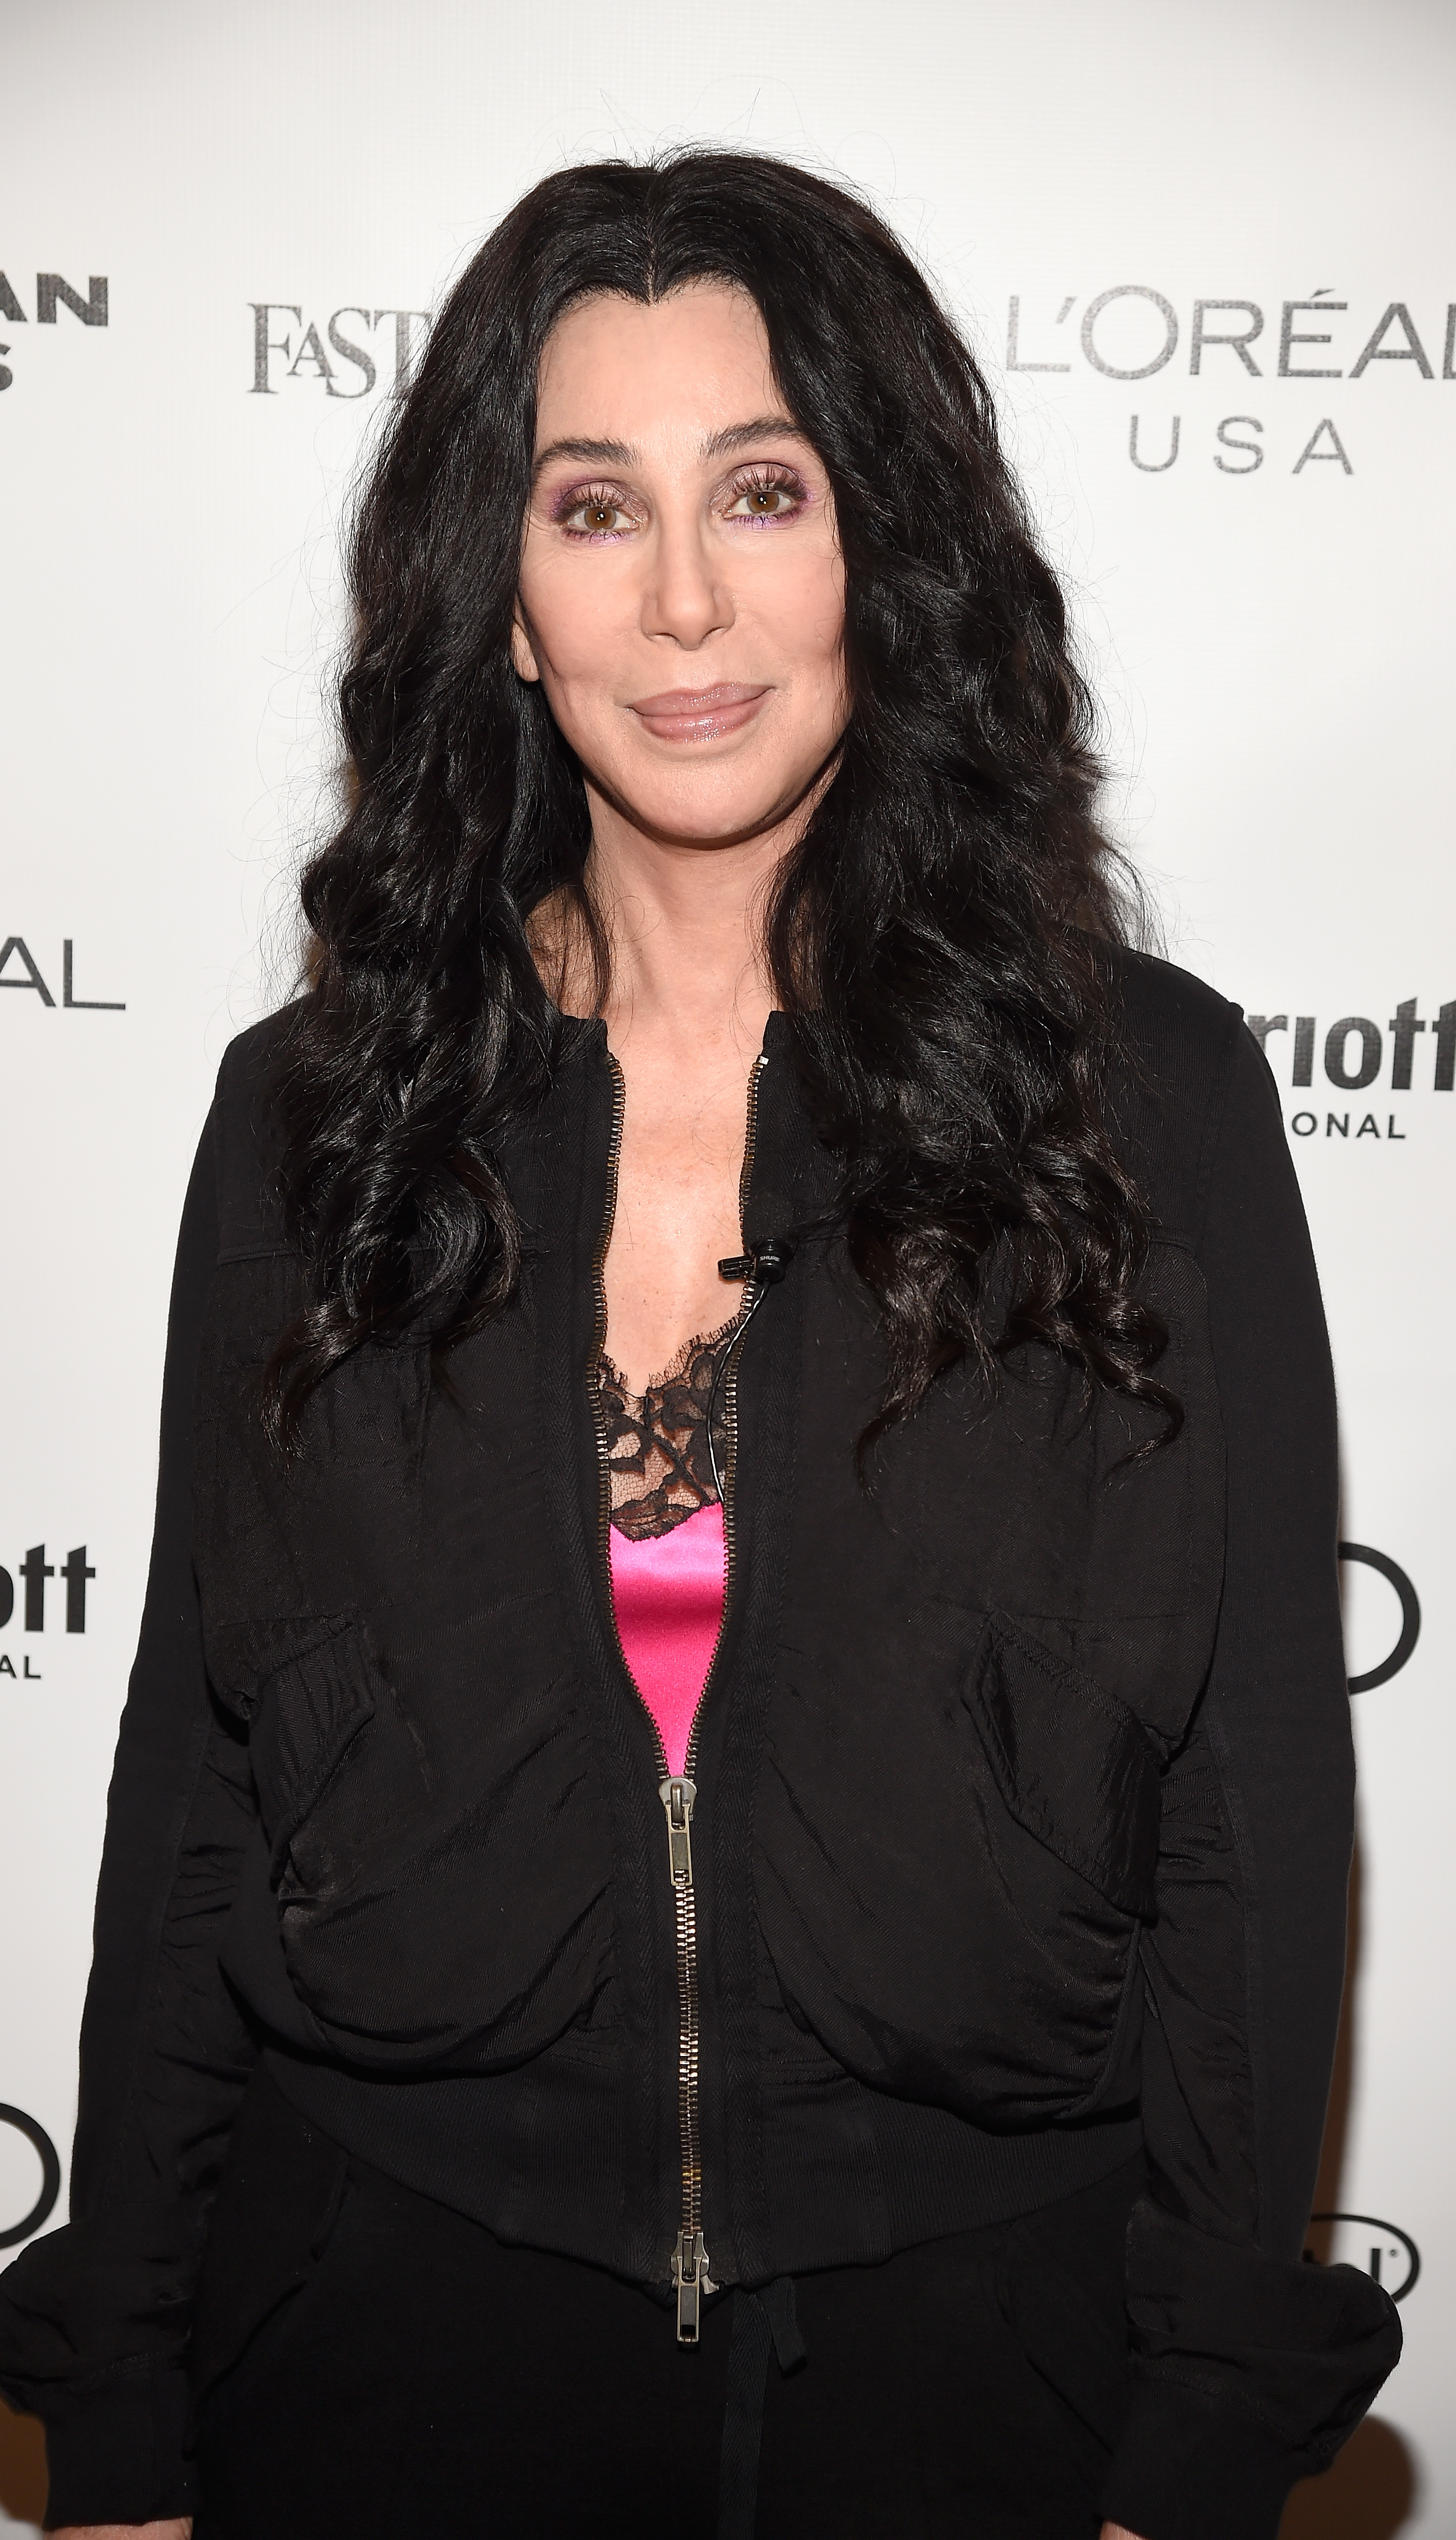 Cher in a black jacket and lace top attends an event